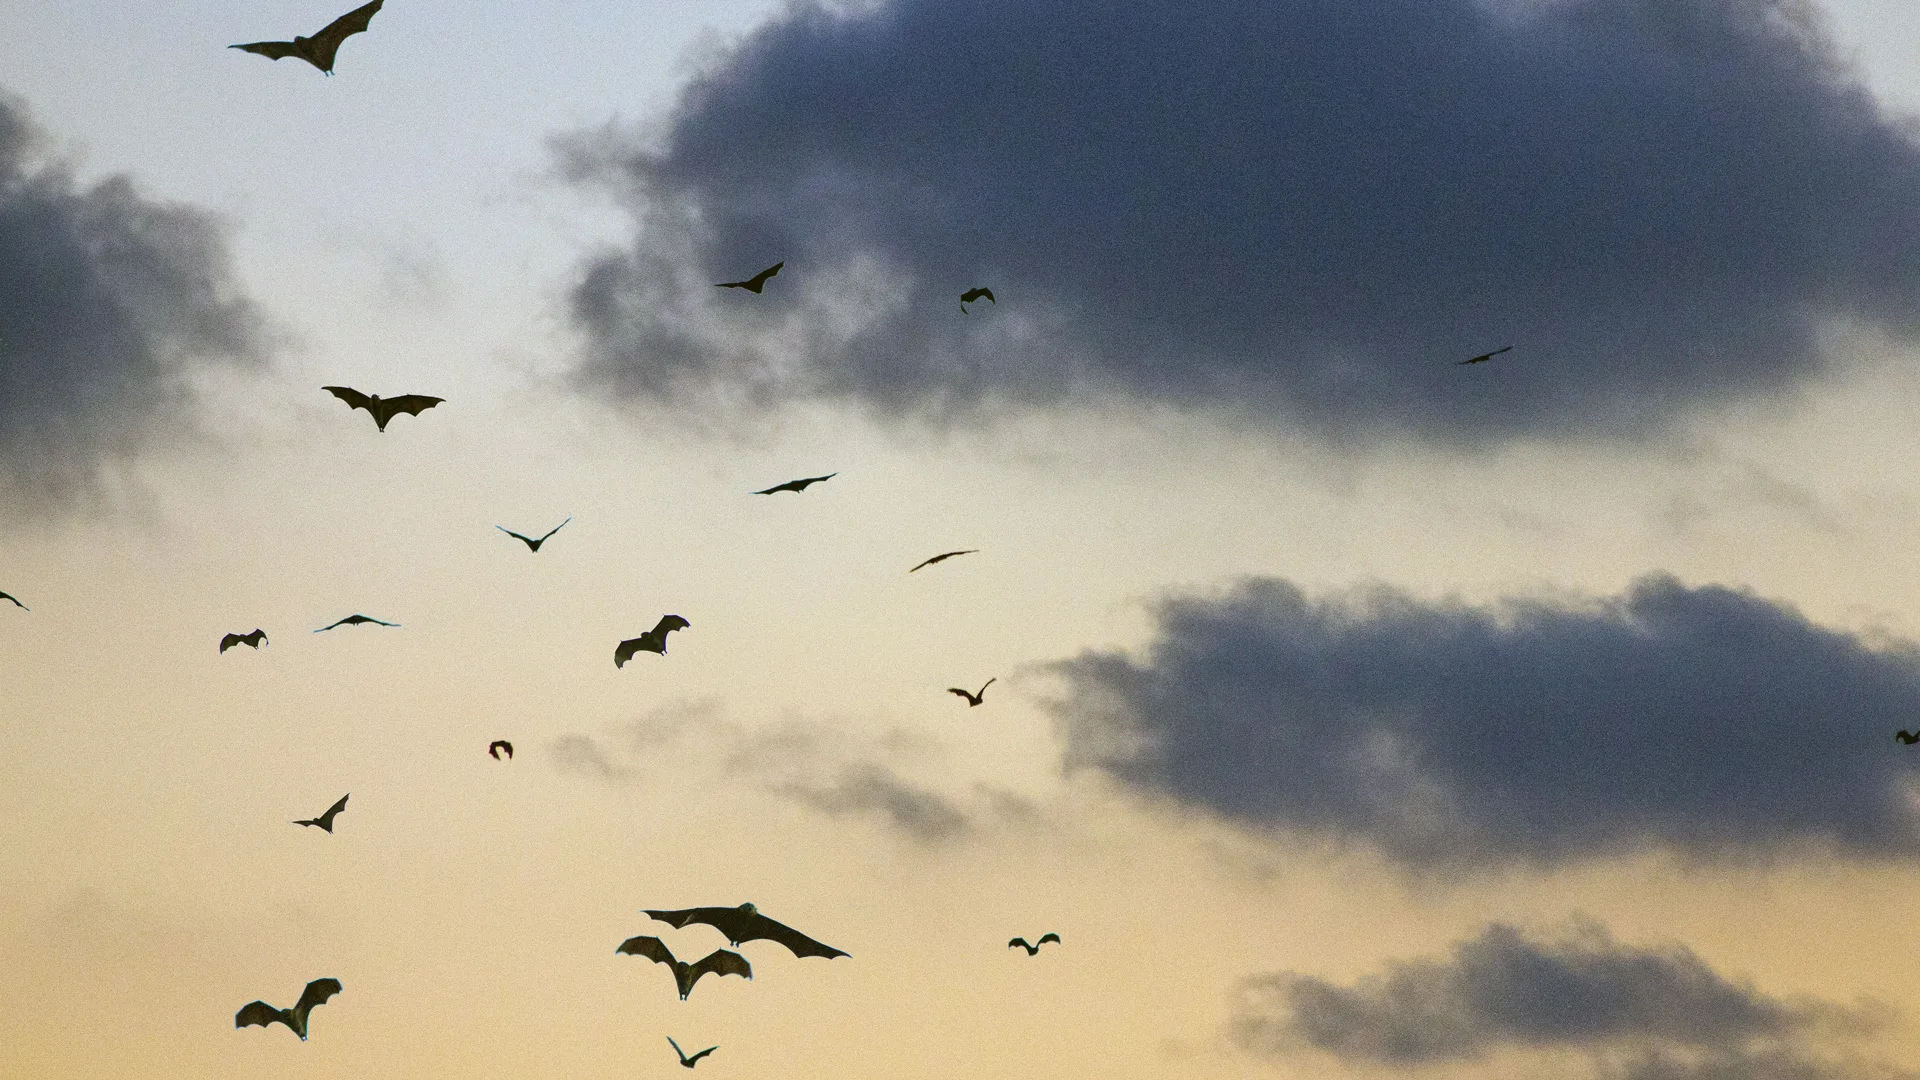 A photograph of bats flying against a sunset sky with clouds